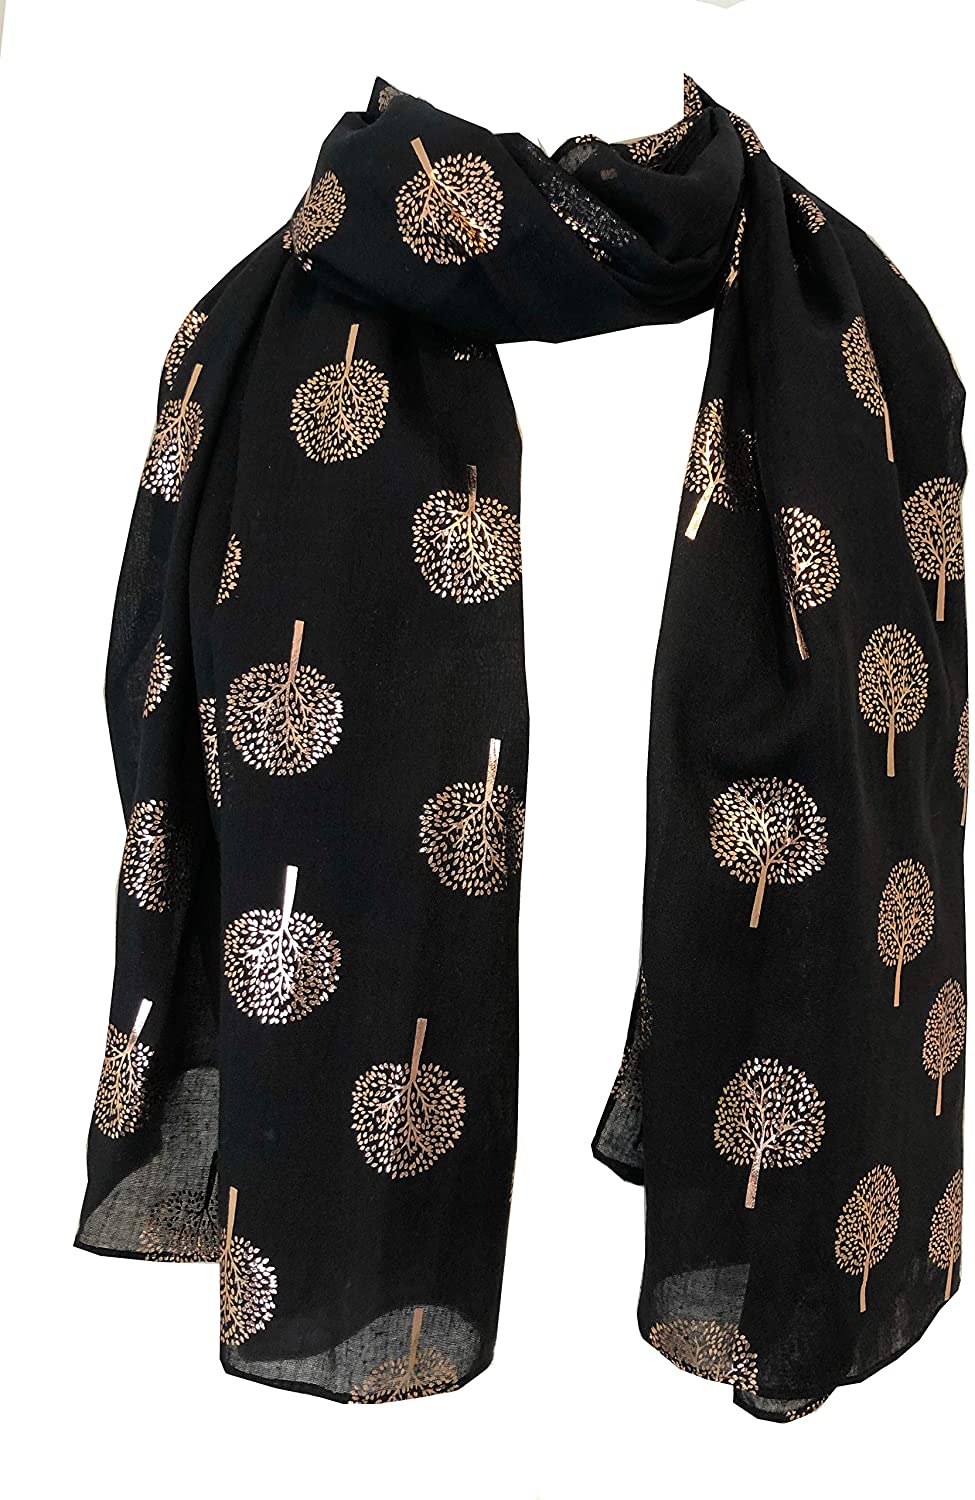 Pamper Yourself Now Black with Gold Foiled Mulberry Tree Design Ladies Scarf/wrap. Great Present for Mum, Sister, Girlfriend or Wife.